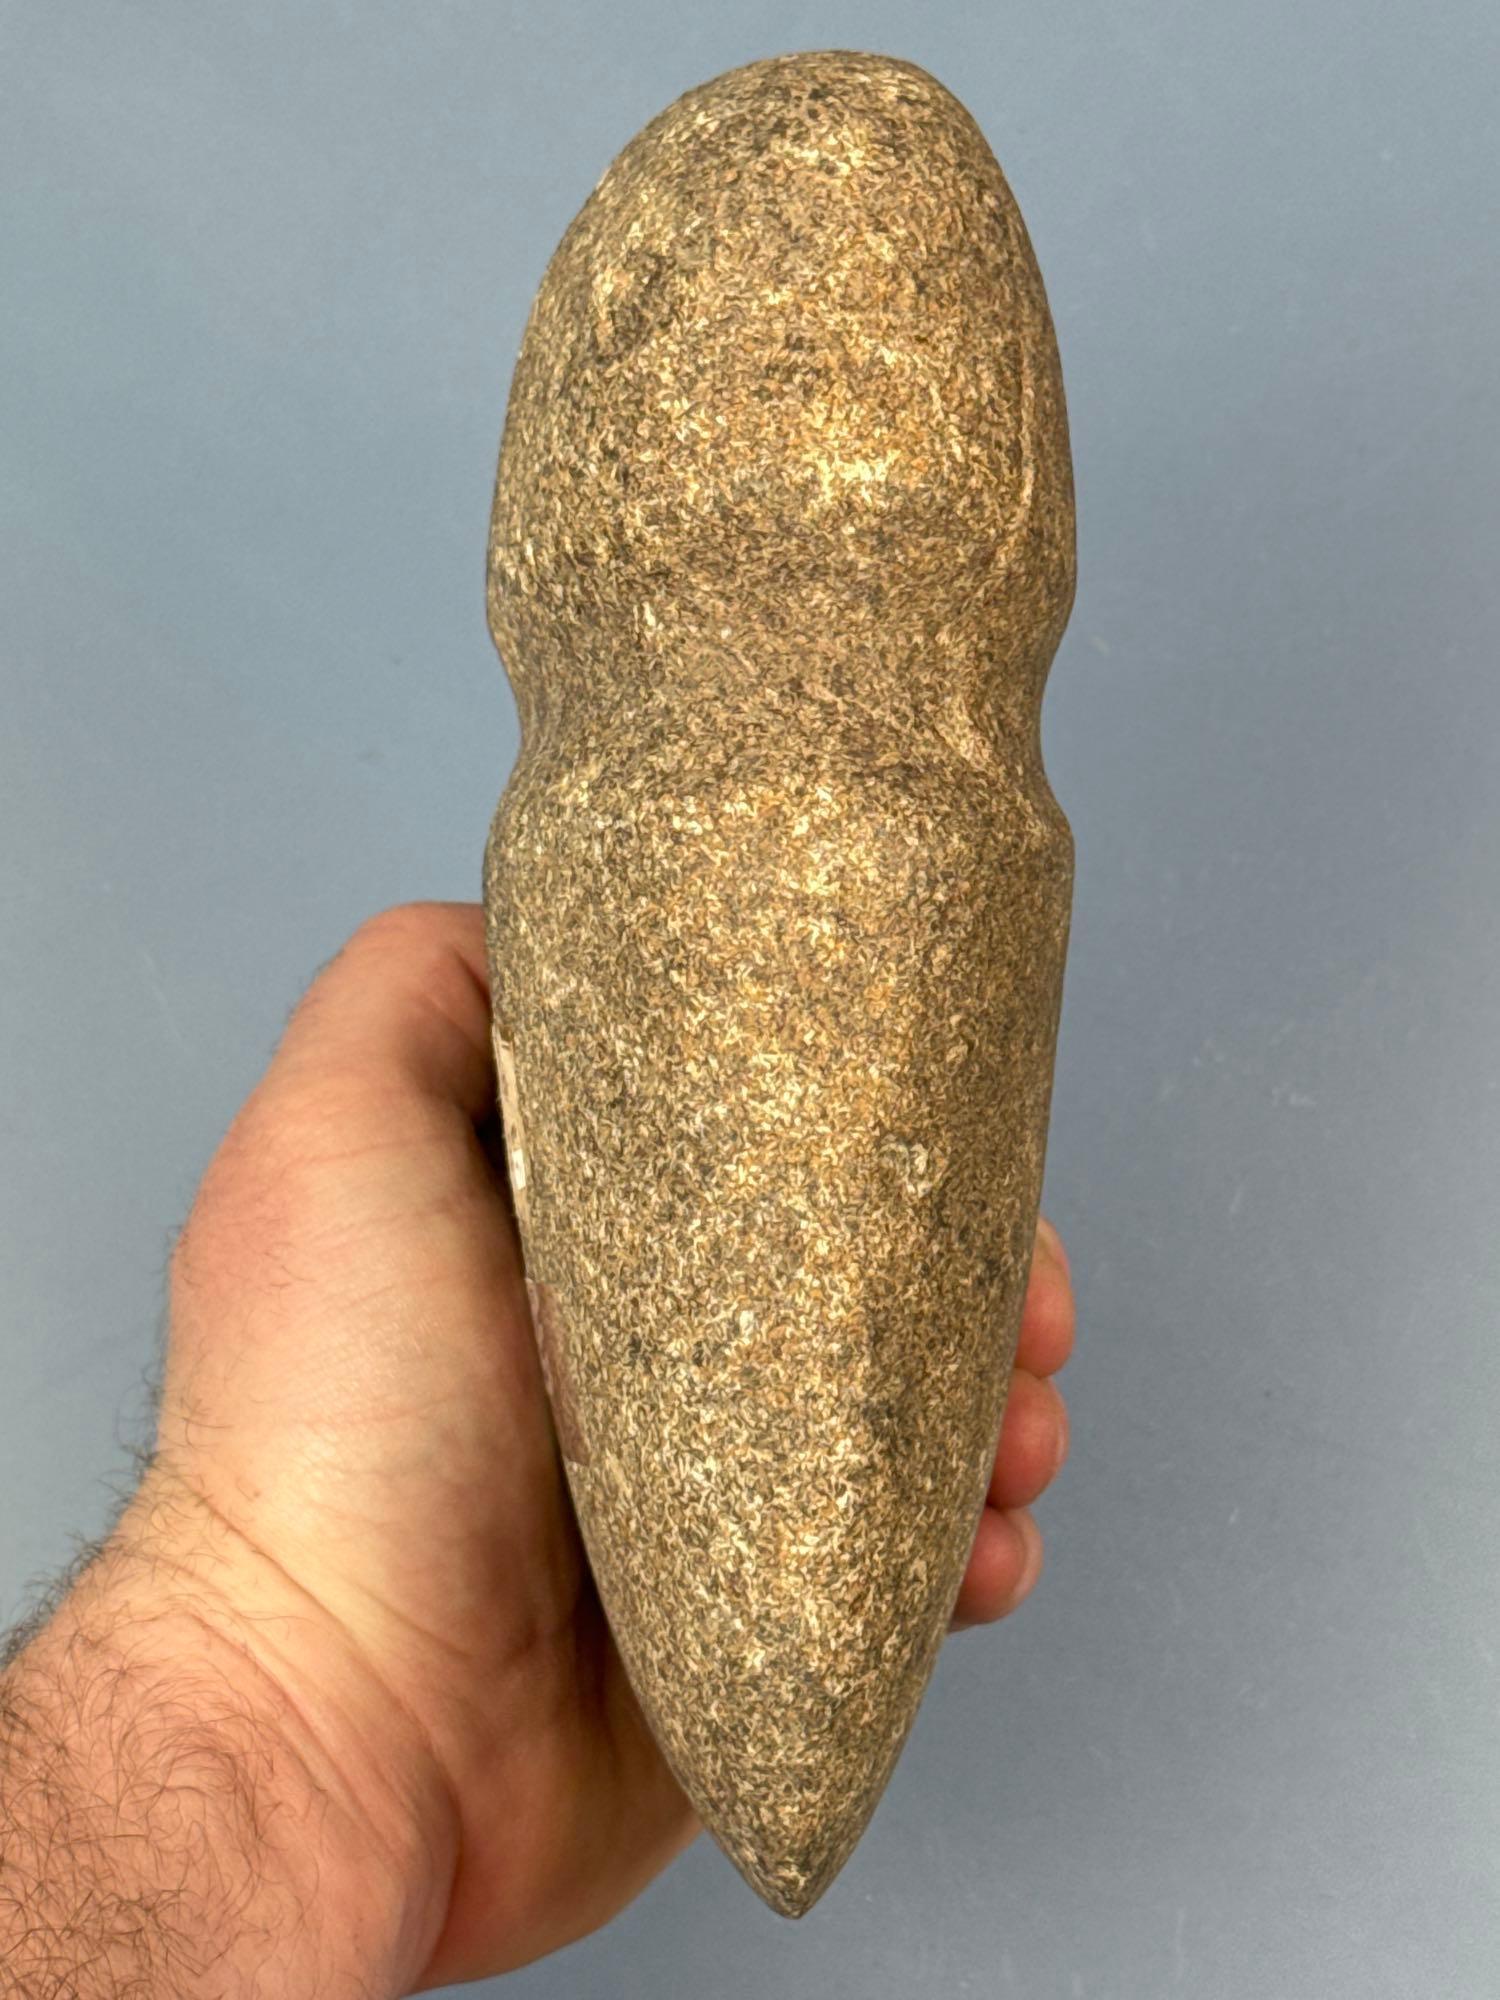 EX: Payne 7 7/8" Full Groove Hardstone Axe, Heavy, Found in Lancaster Co., PA, Ex: PAYNE, Reed, Hend